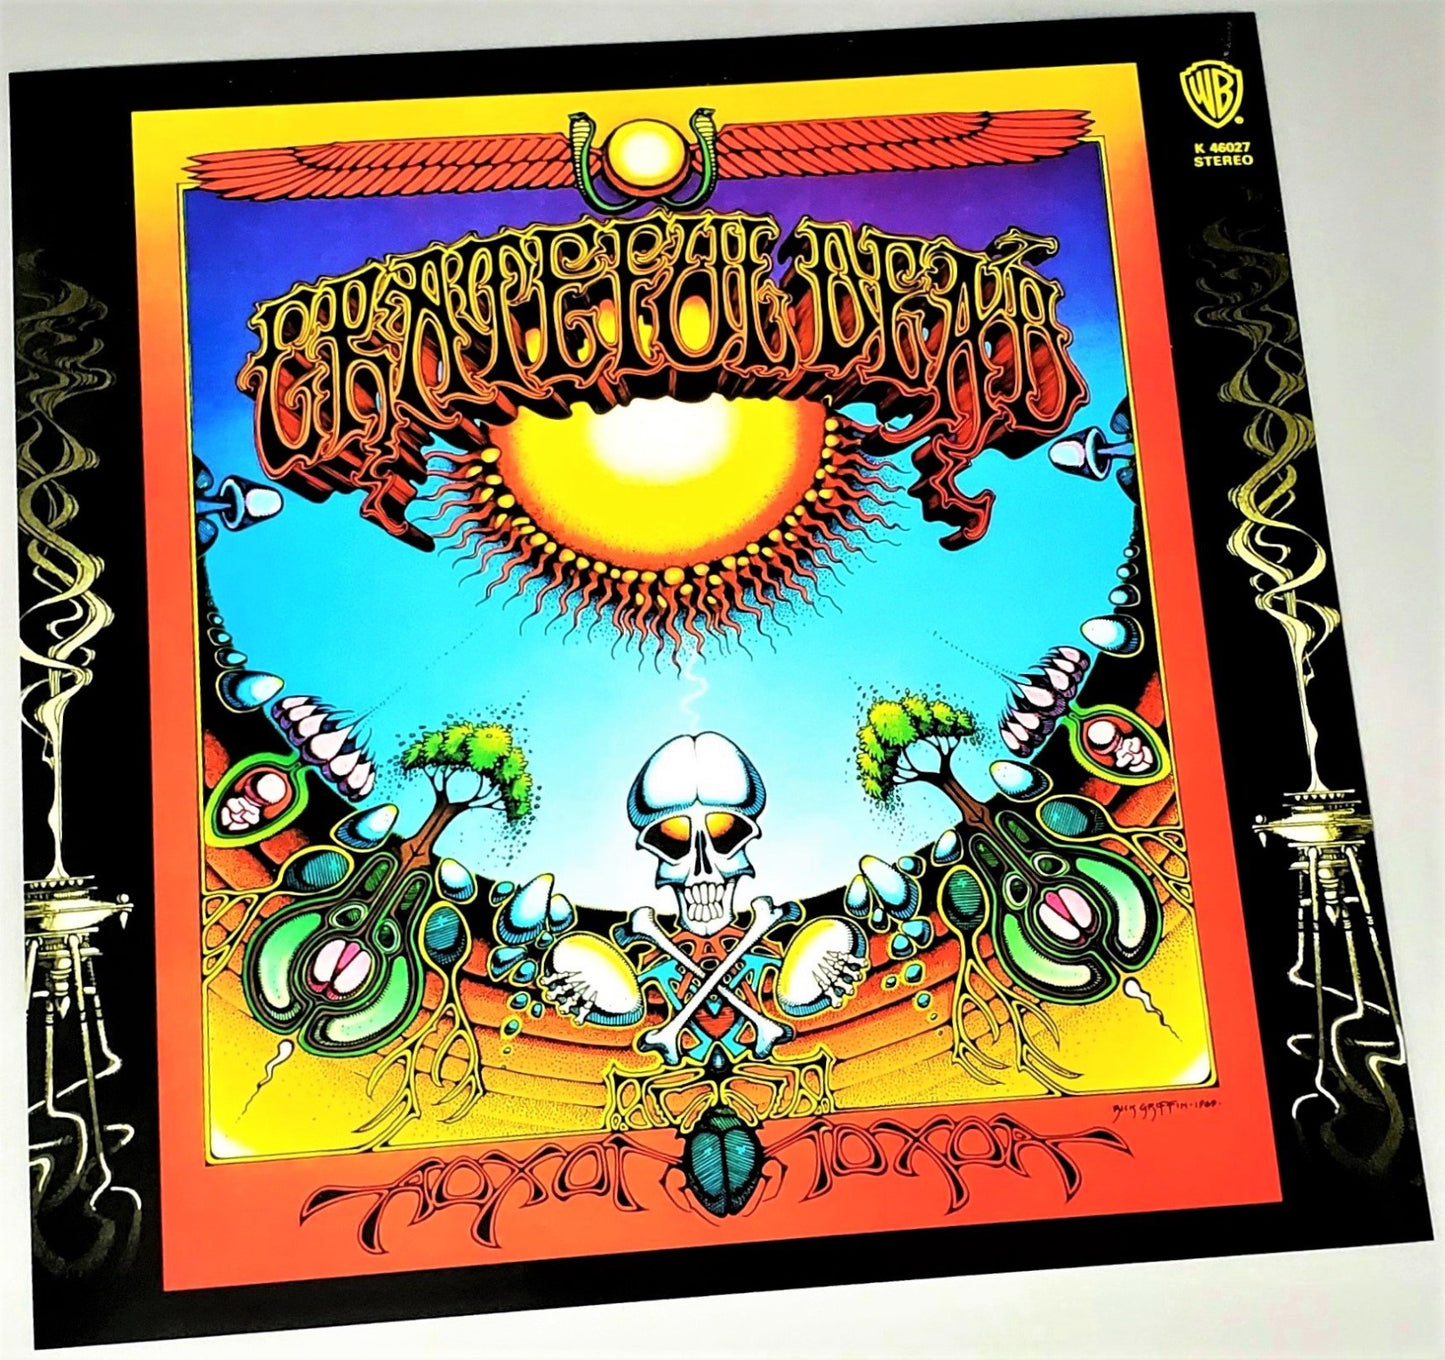 Grateful Dead 1969 AOXOMOXOA album cover art page featured in Rock Covers 2014 coffee table book available in area51gallery